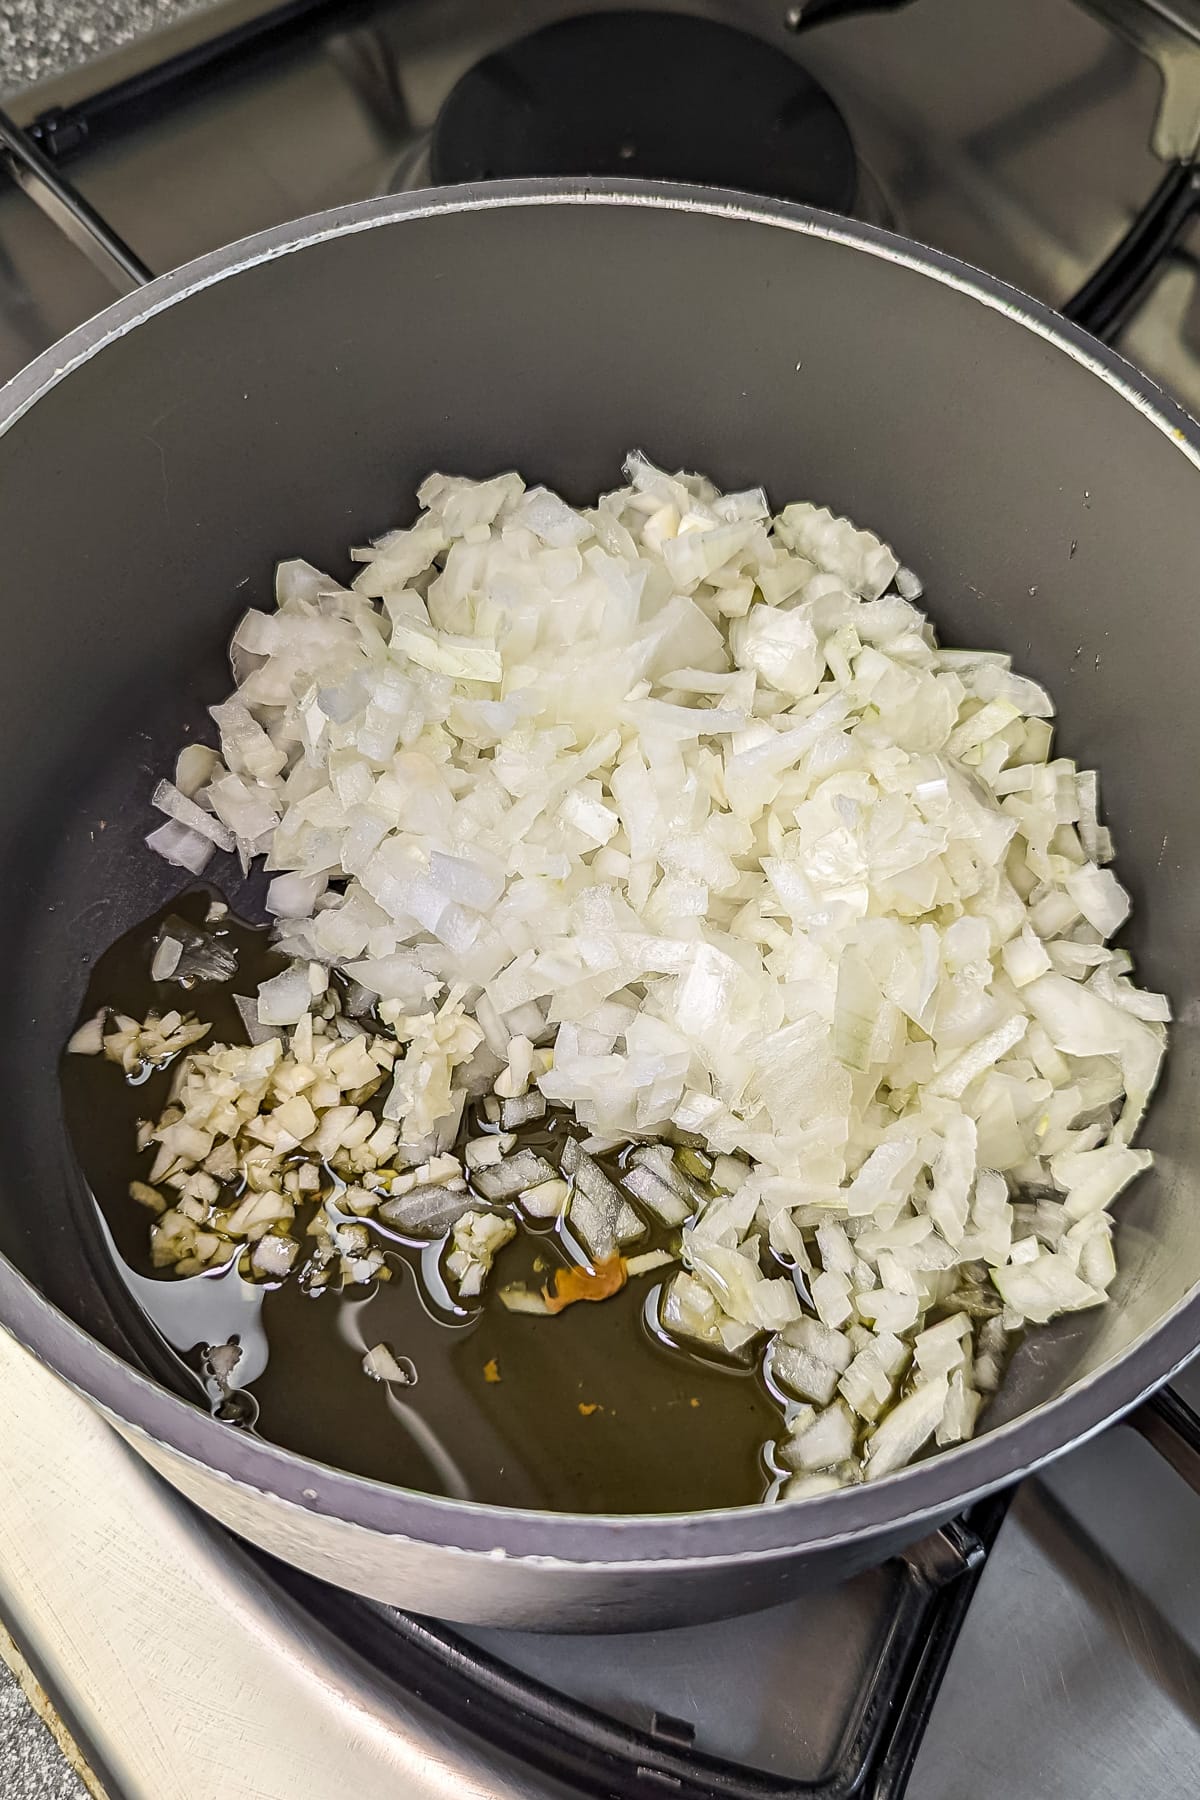 Chopped onions and garlic sautéing in a pot with olive oil.